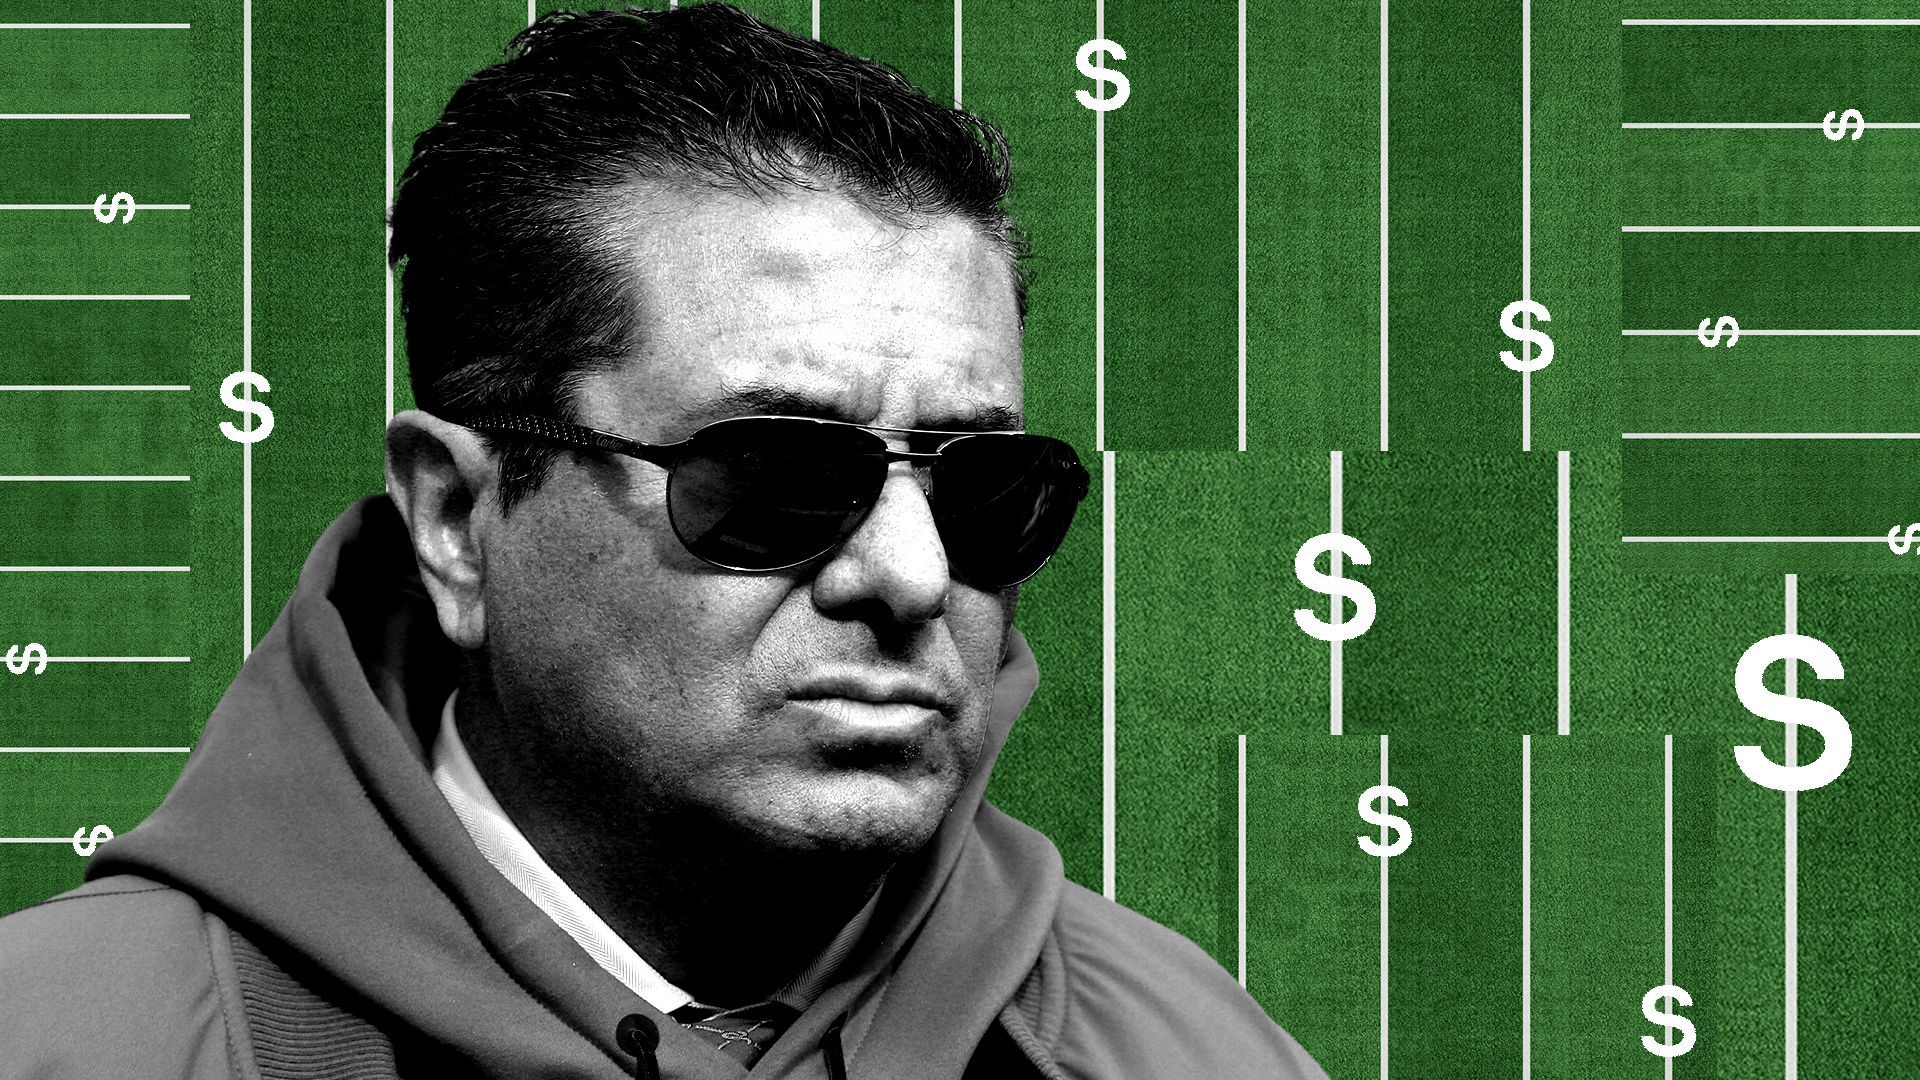 Photo illustration of Dan Snyder on an abstract background made up of dollar bill signs and football pitches.